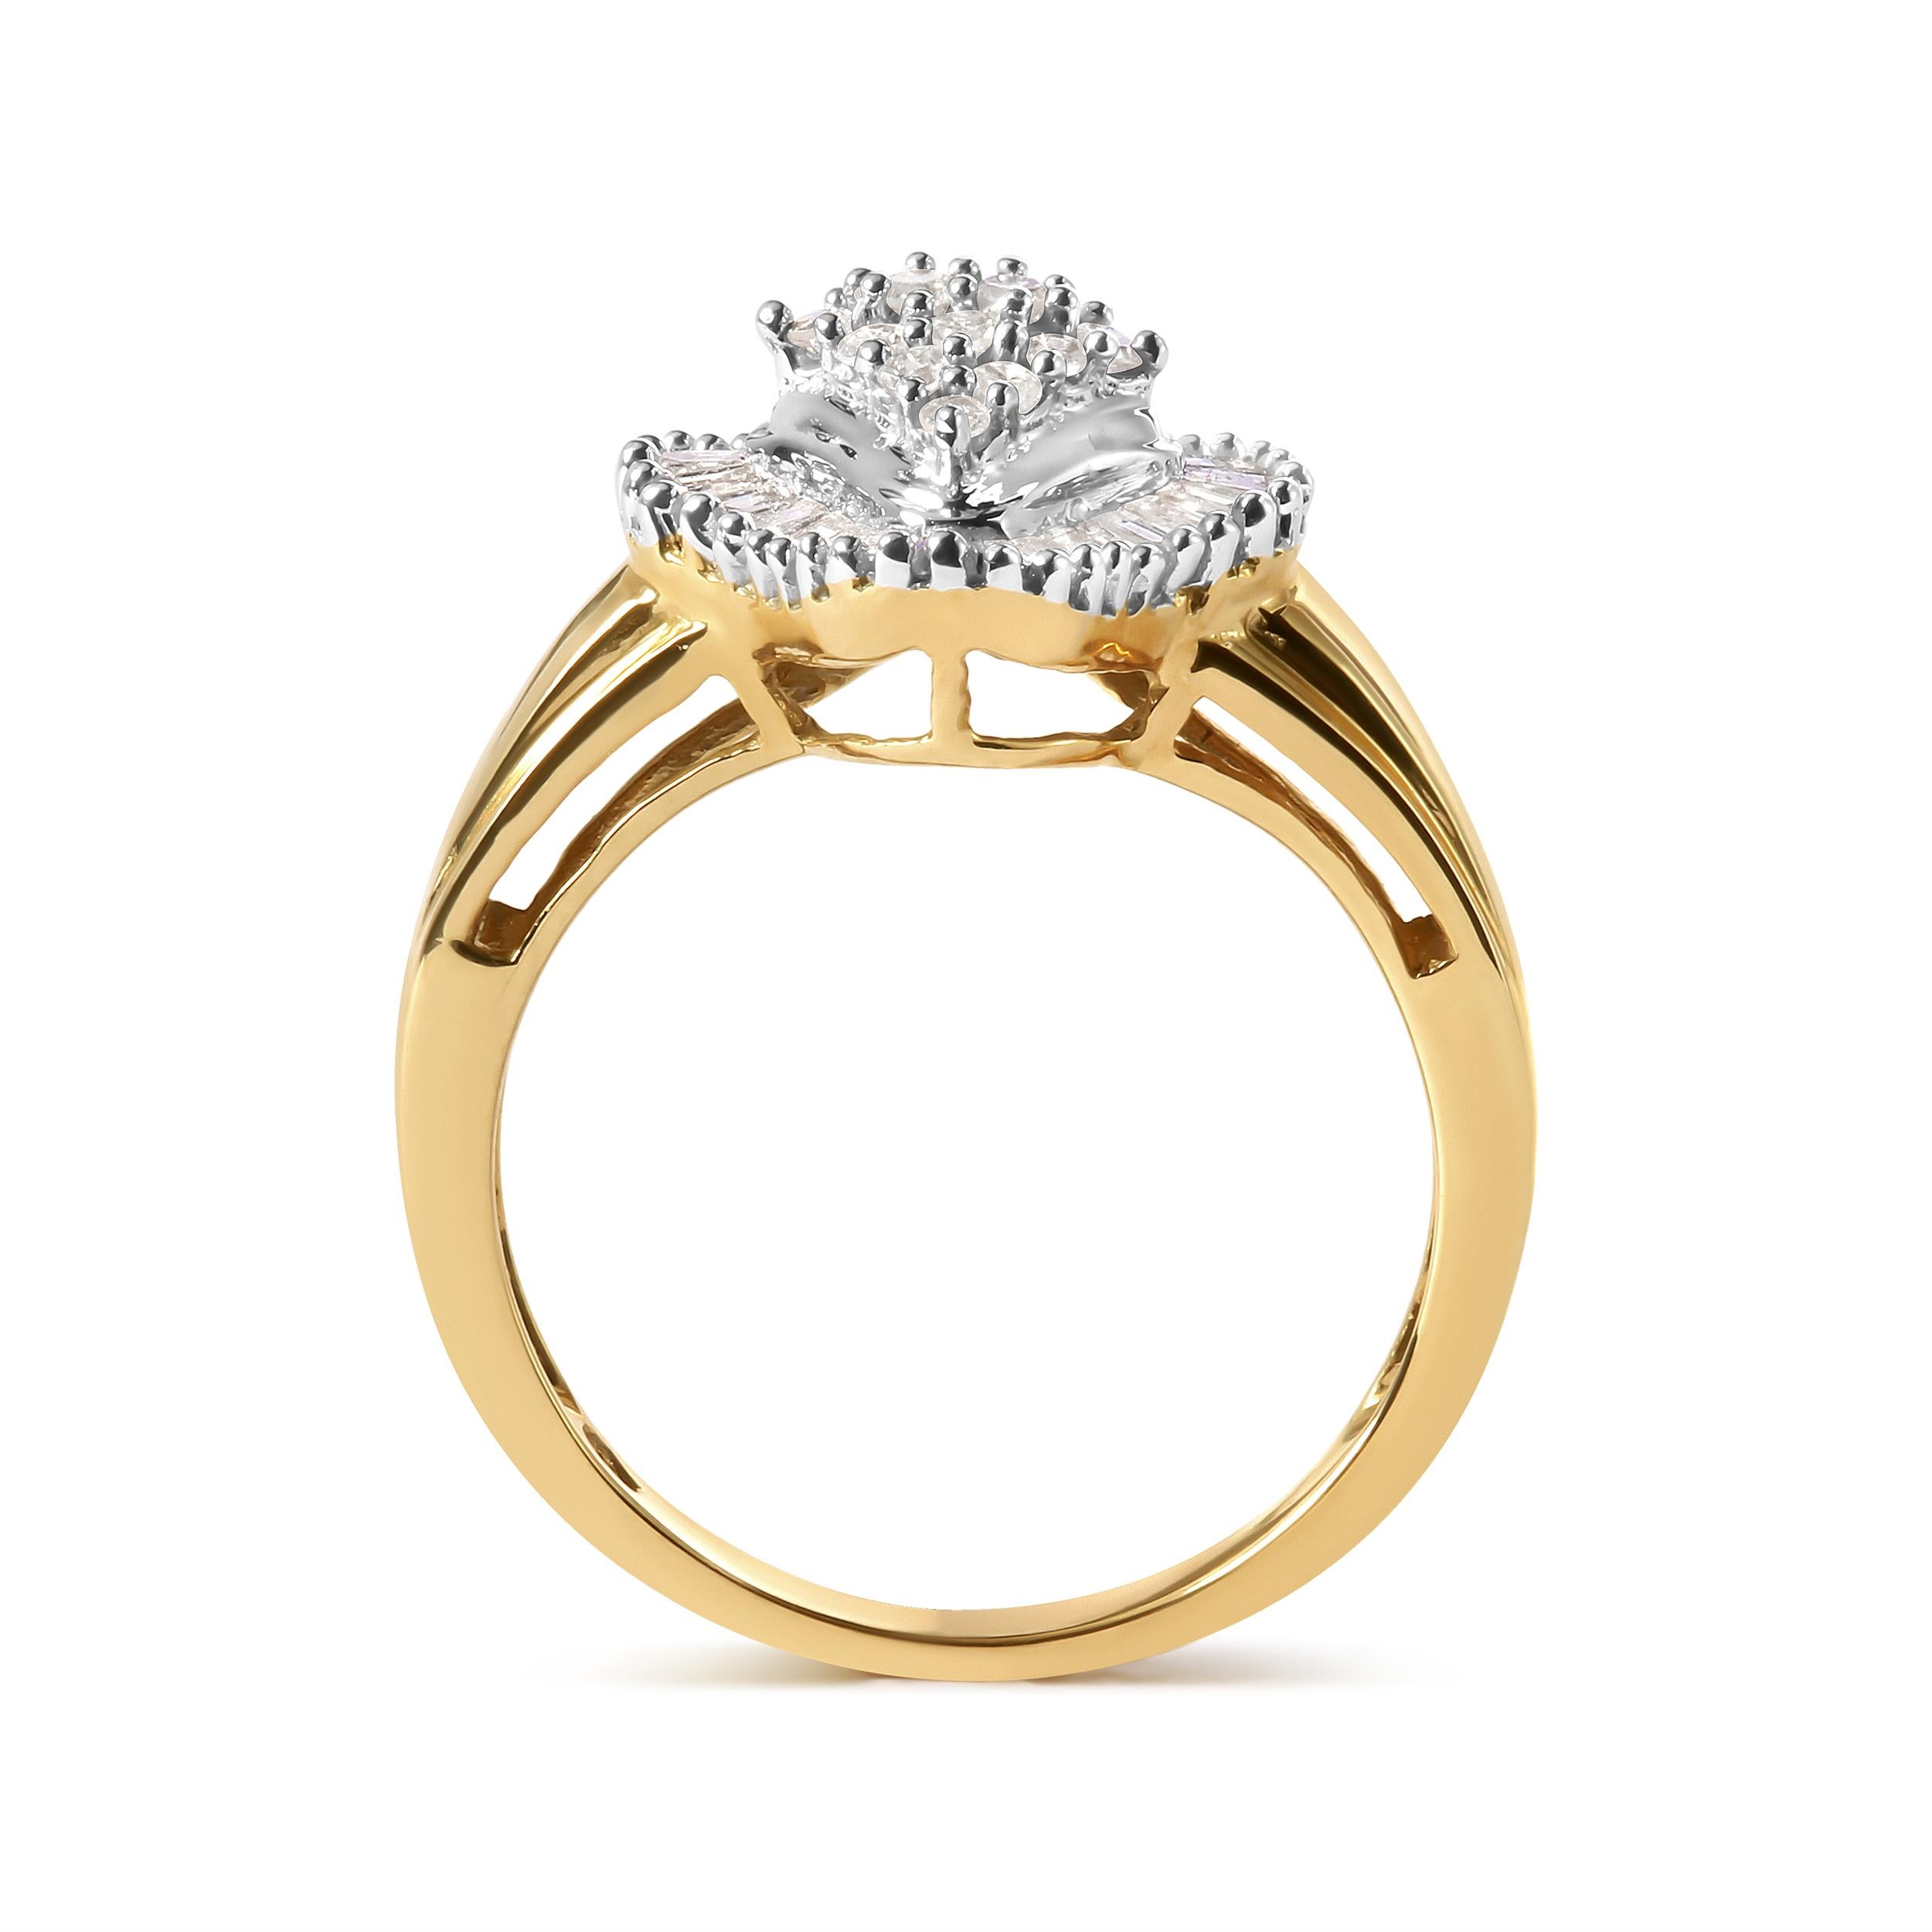 Indulge in the allure of our 10K yellow gold fashion ring, a true masterpiece that exudes sophistication and glamour. A captivating ensemble of 48 diamonds graces the ring, including 16 resplendent rounds and 32 dazzling baguette-cuts. With a total